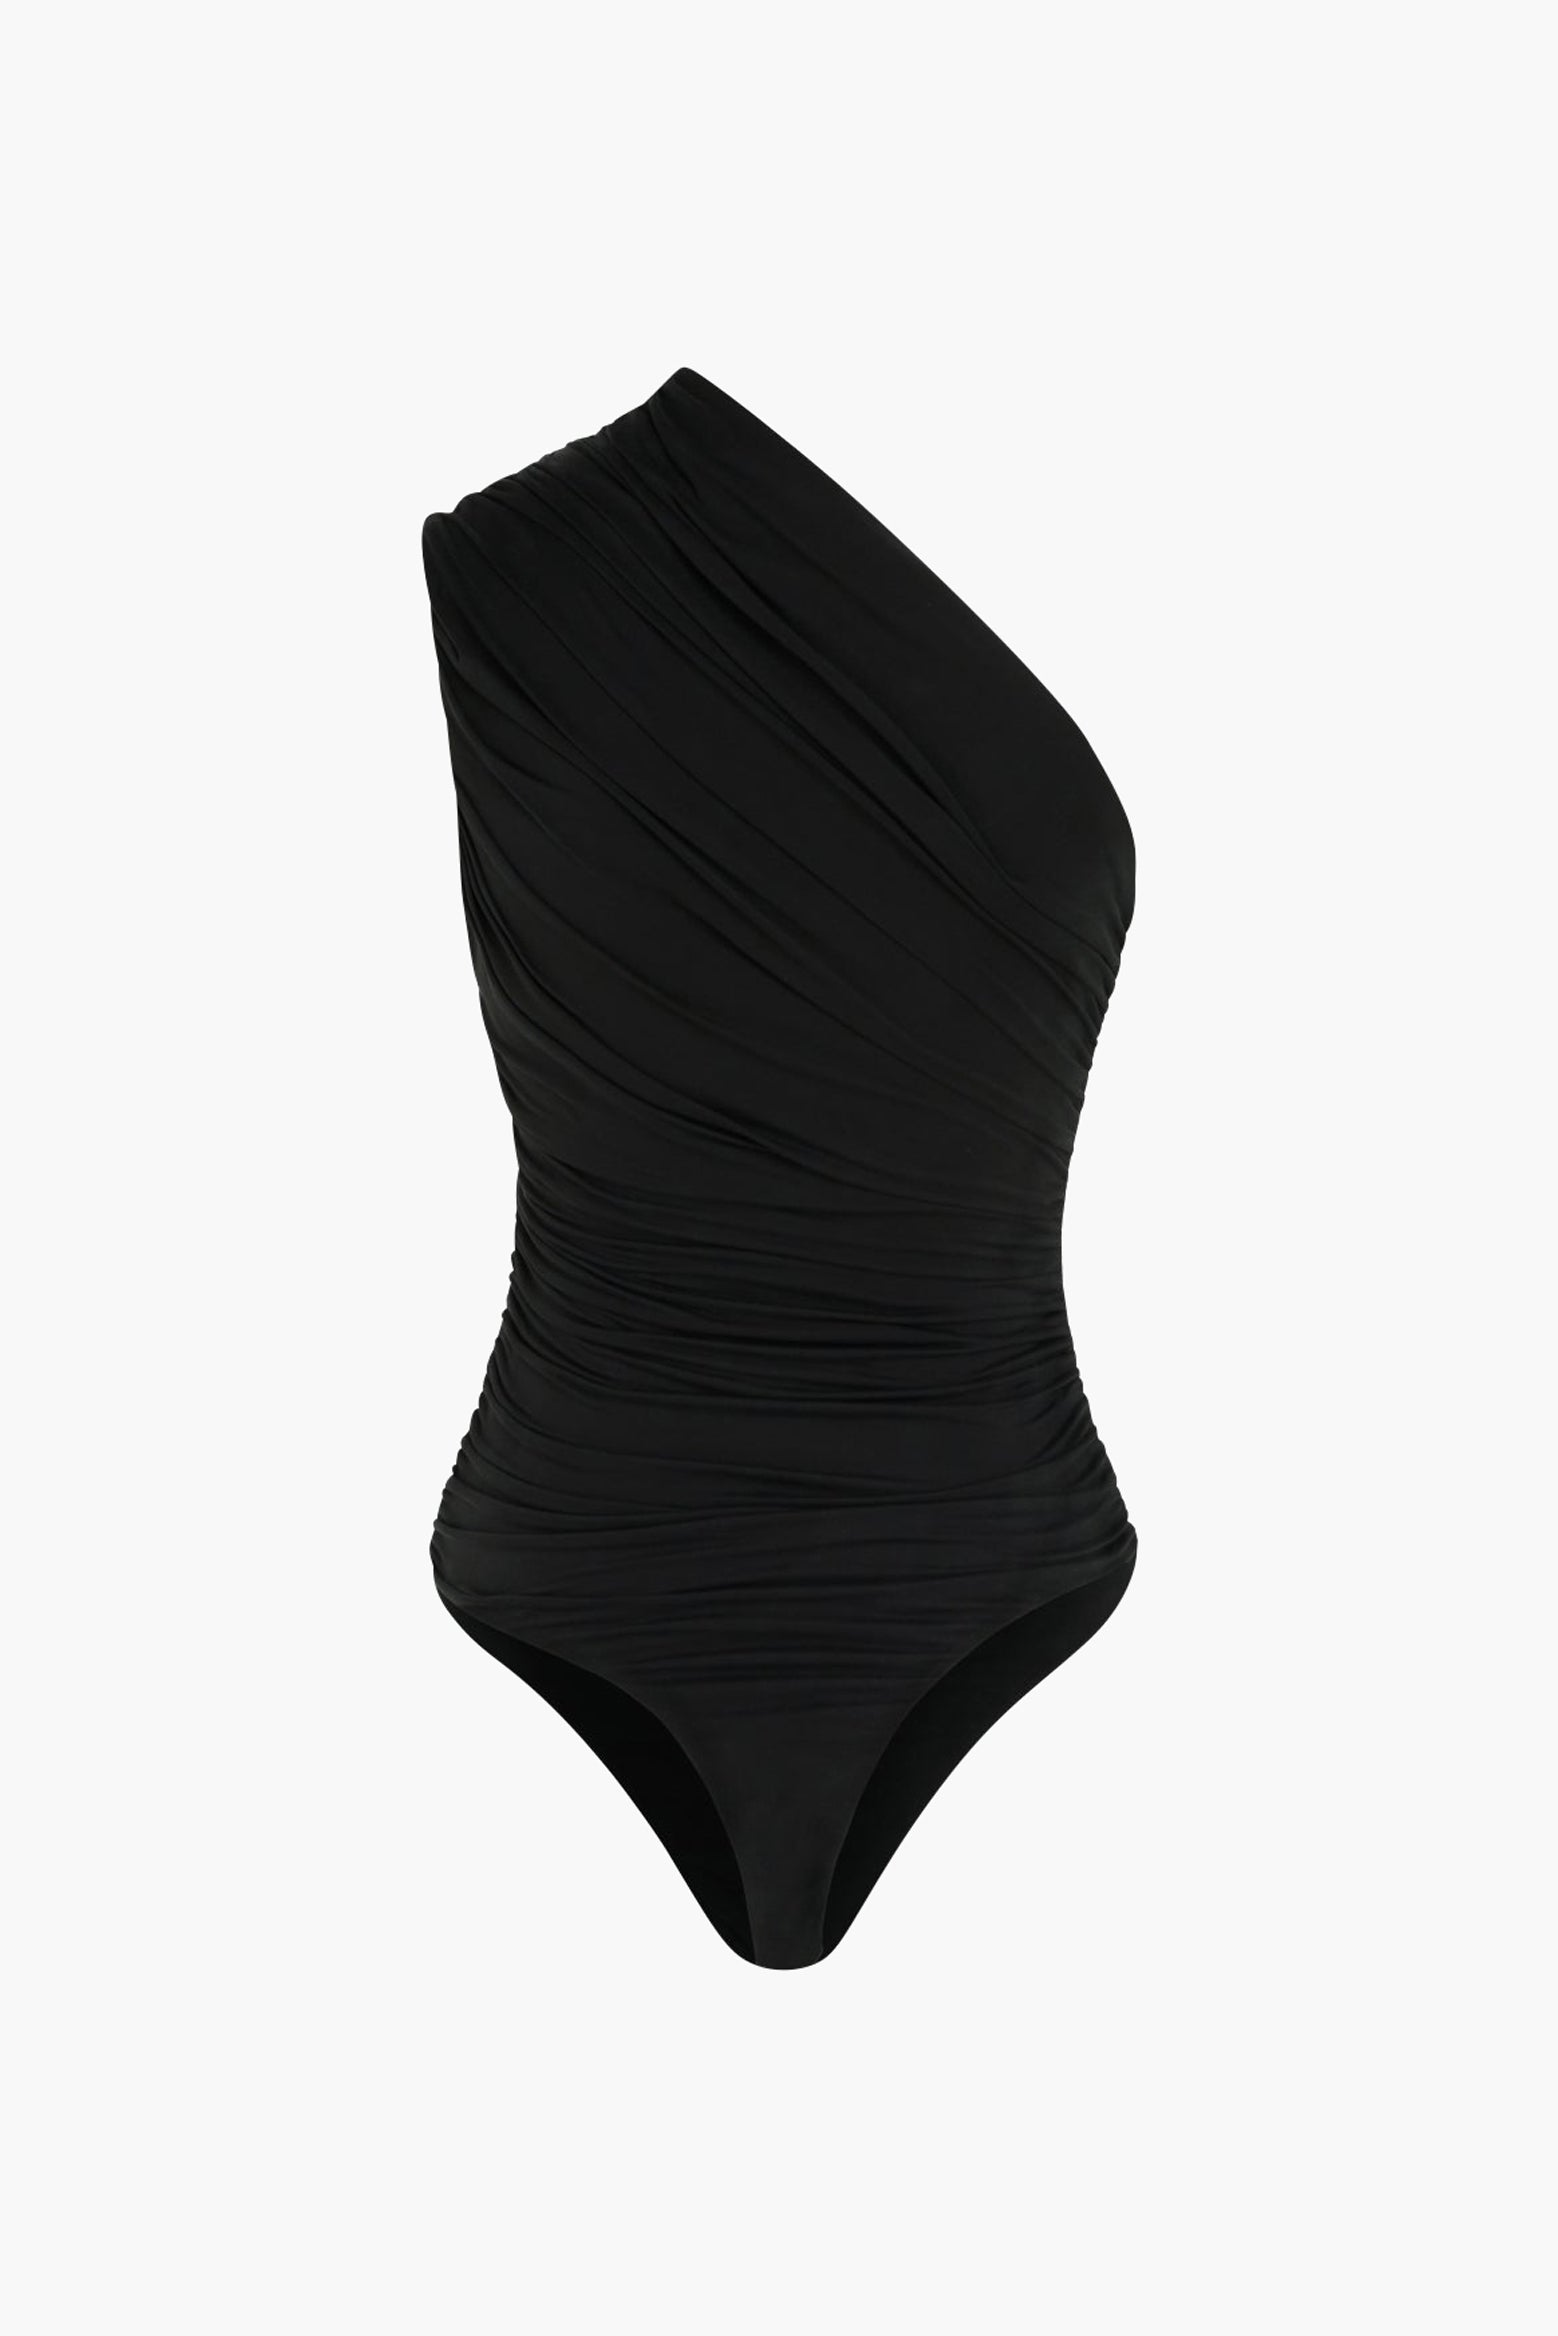 Gauge81 Tera Bodysuit in Black available at TNT The New Trend Australia